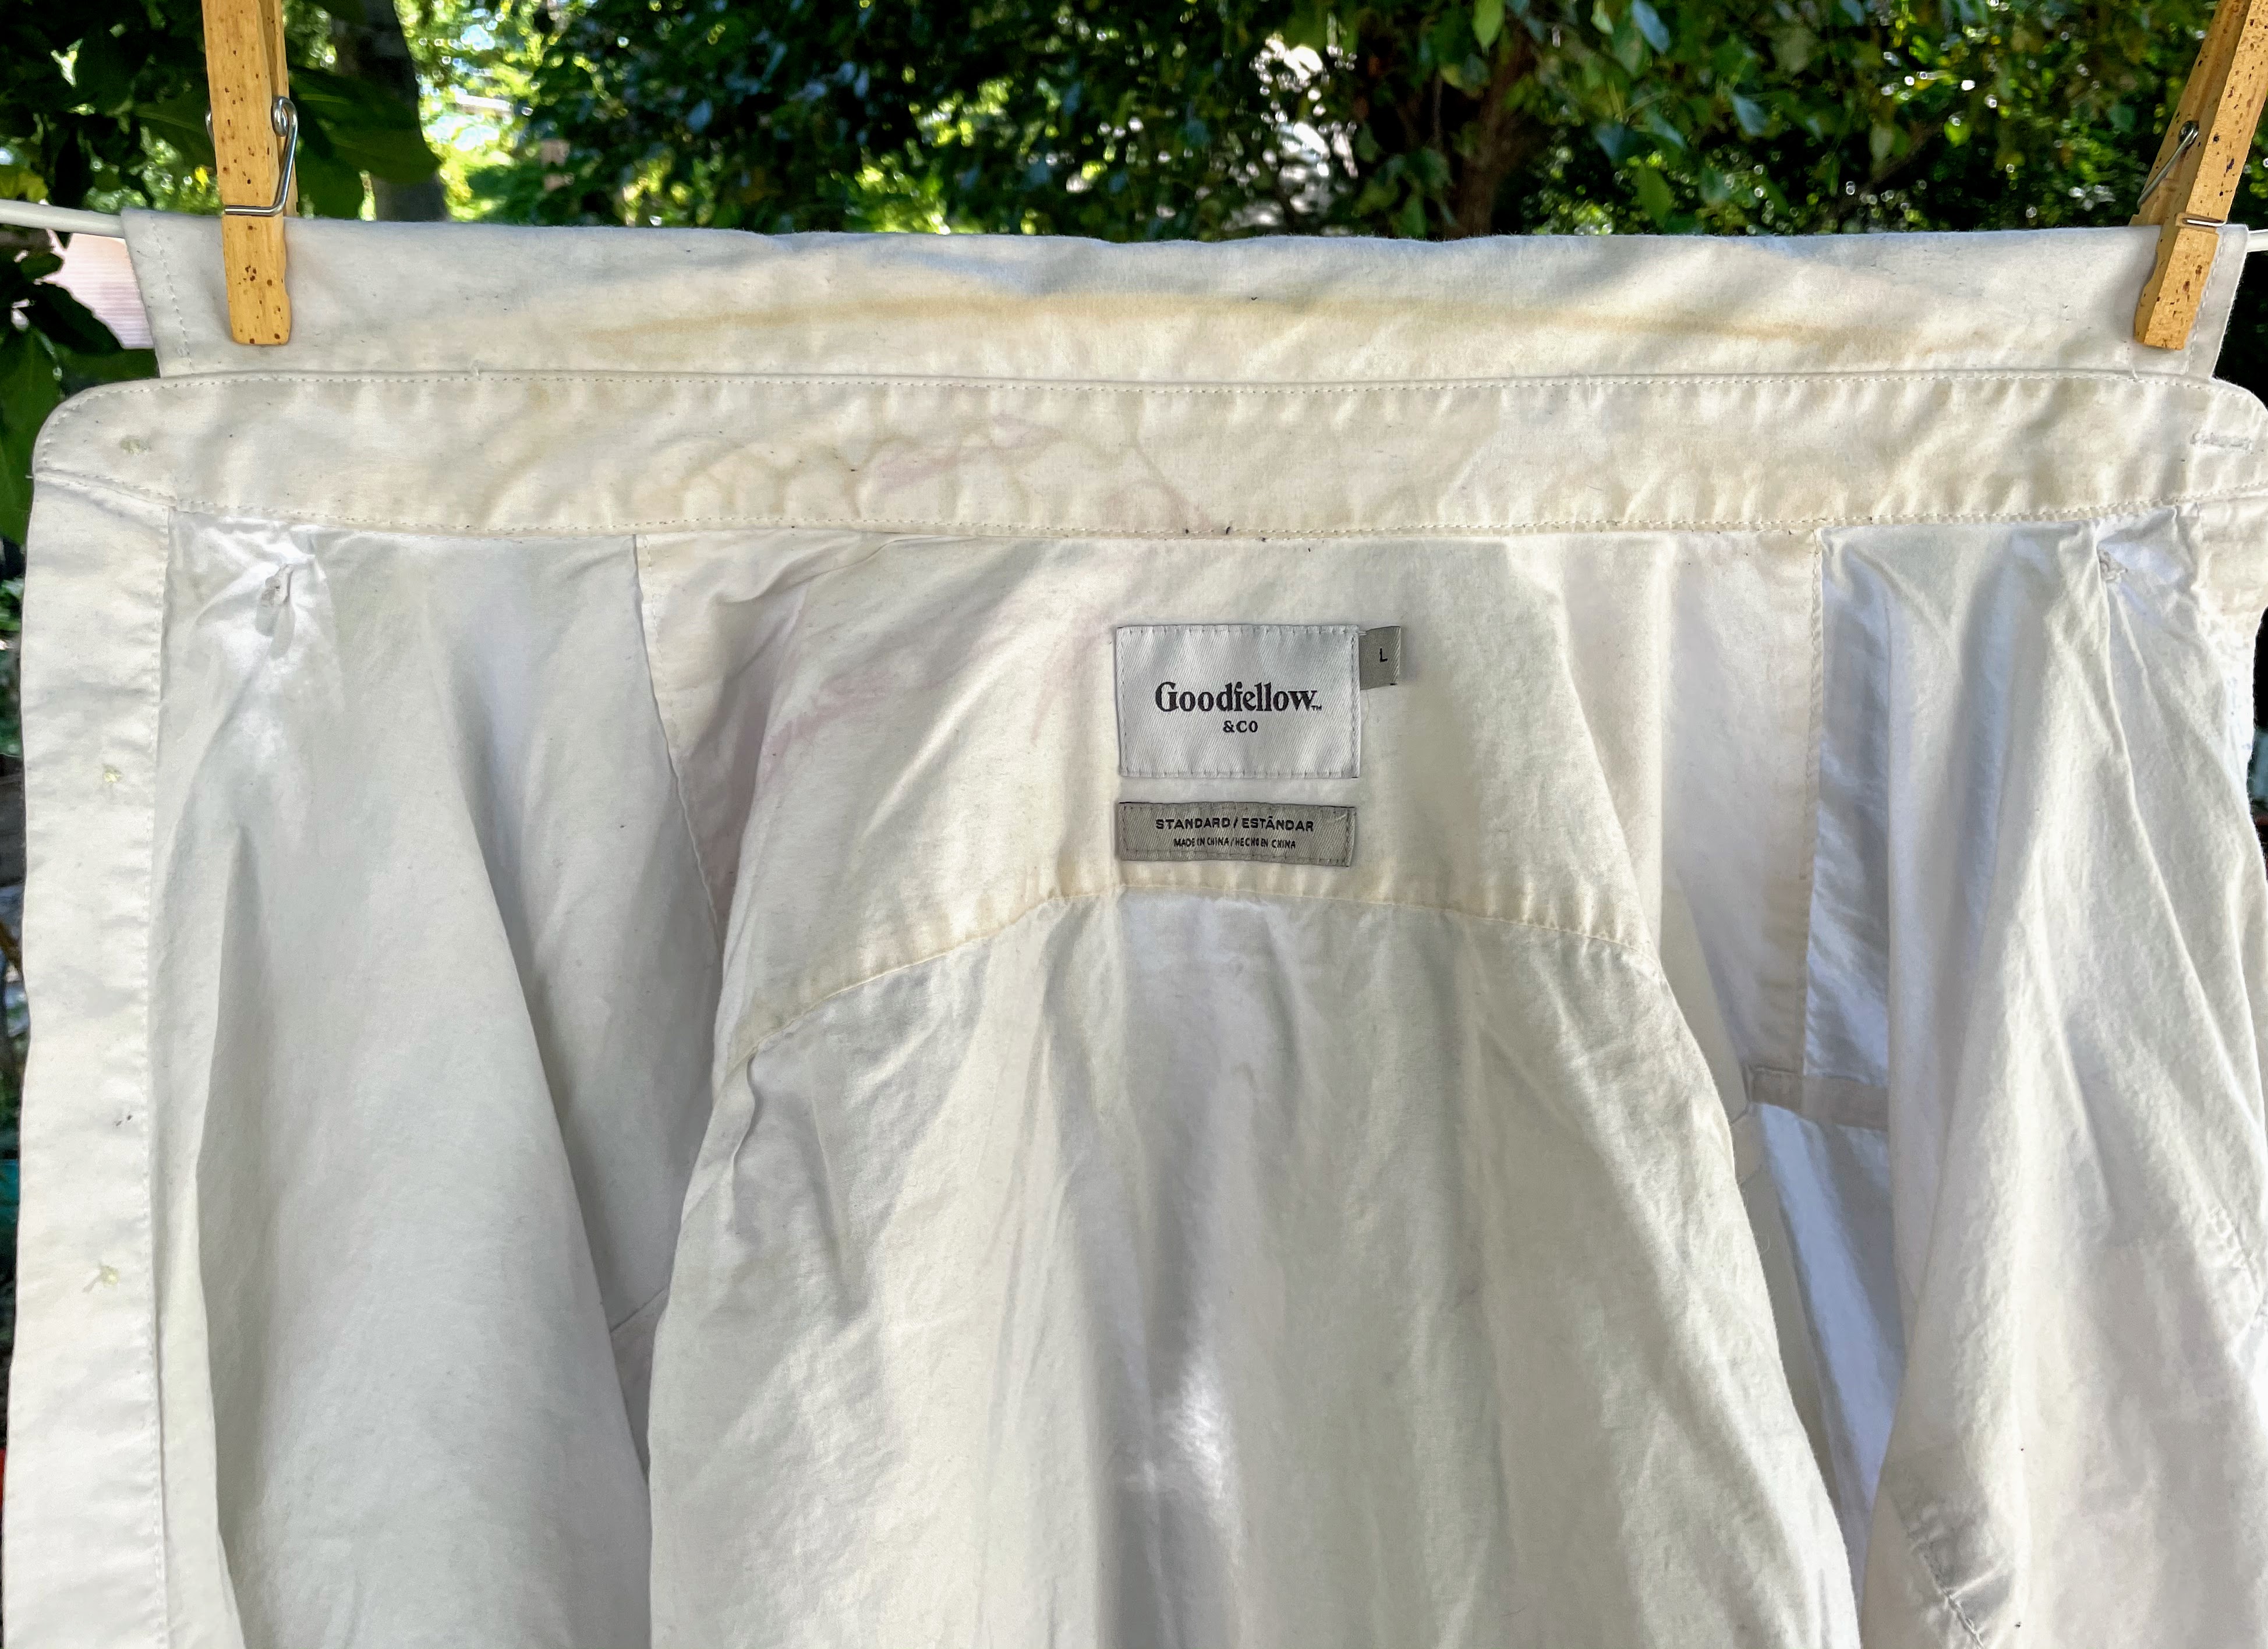 Photo of dirty white shirt hanging on clothesline